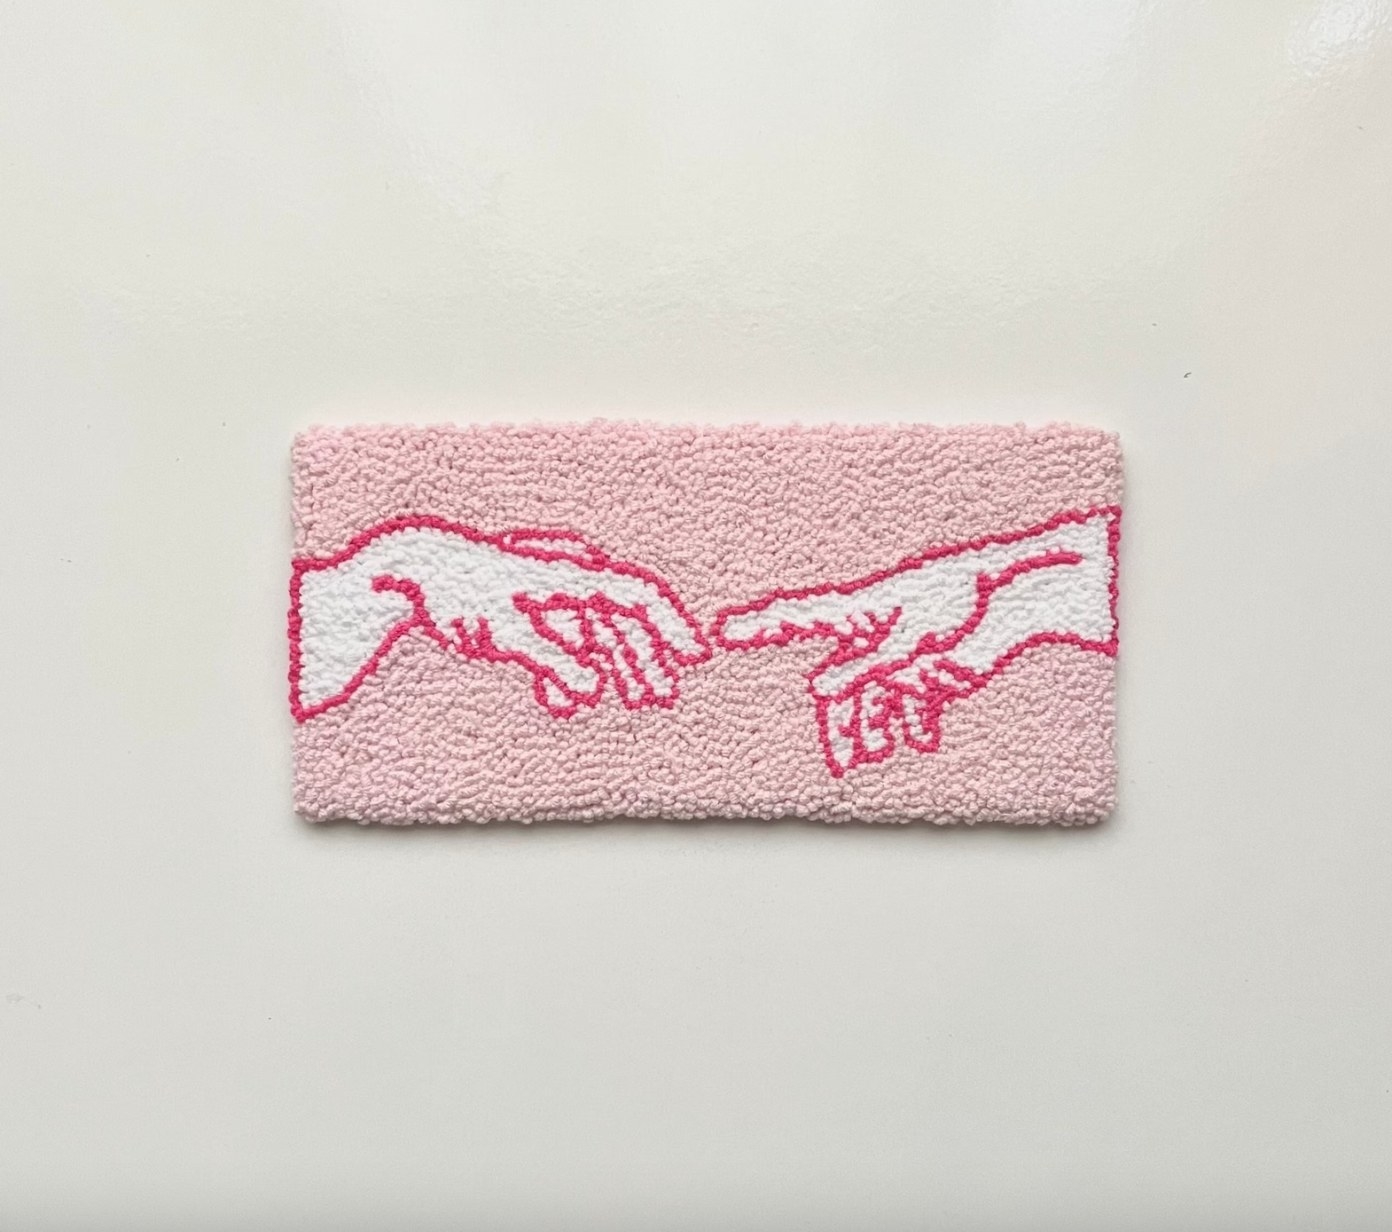 Pink tufted depiction of The Creation of Adam